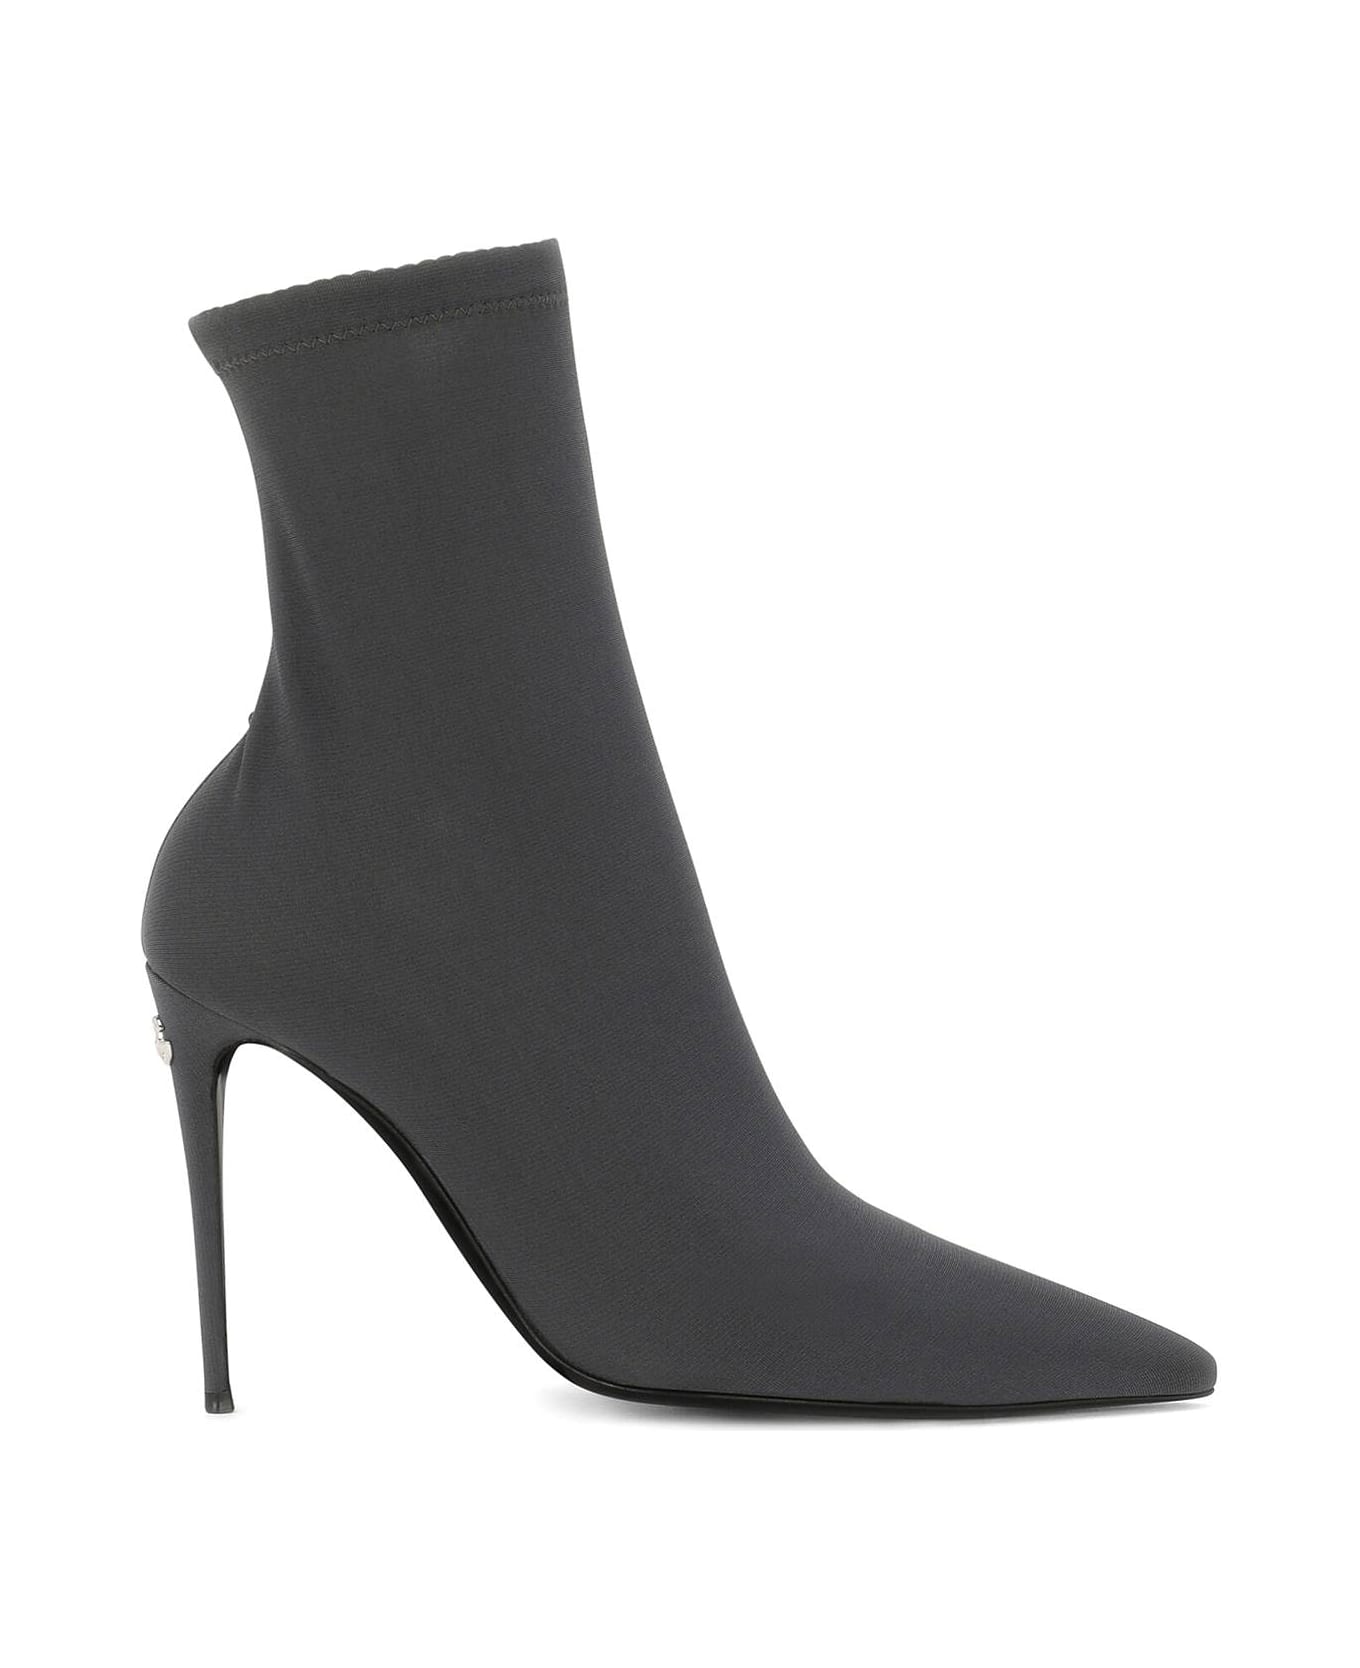 Dolce & Gabbana Stretch Jersey Ankle Boots - GRIGIO SCURO (Grey) ブーツ